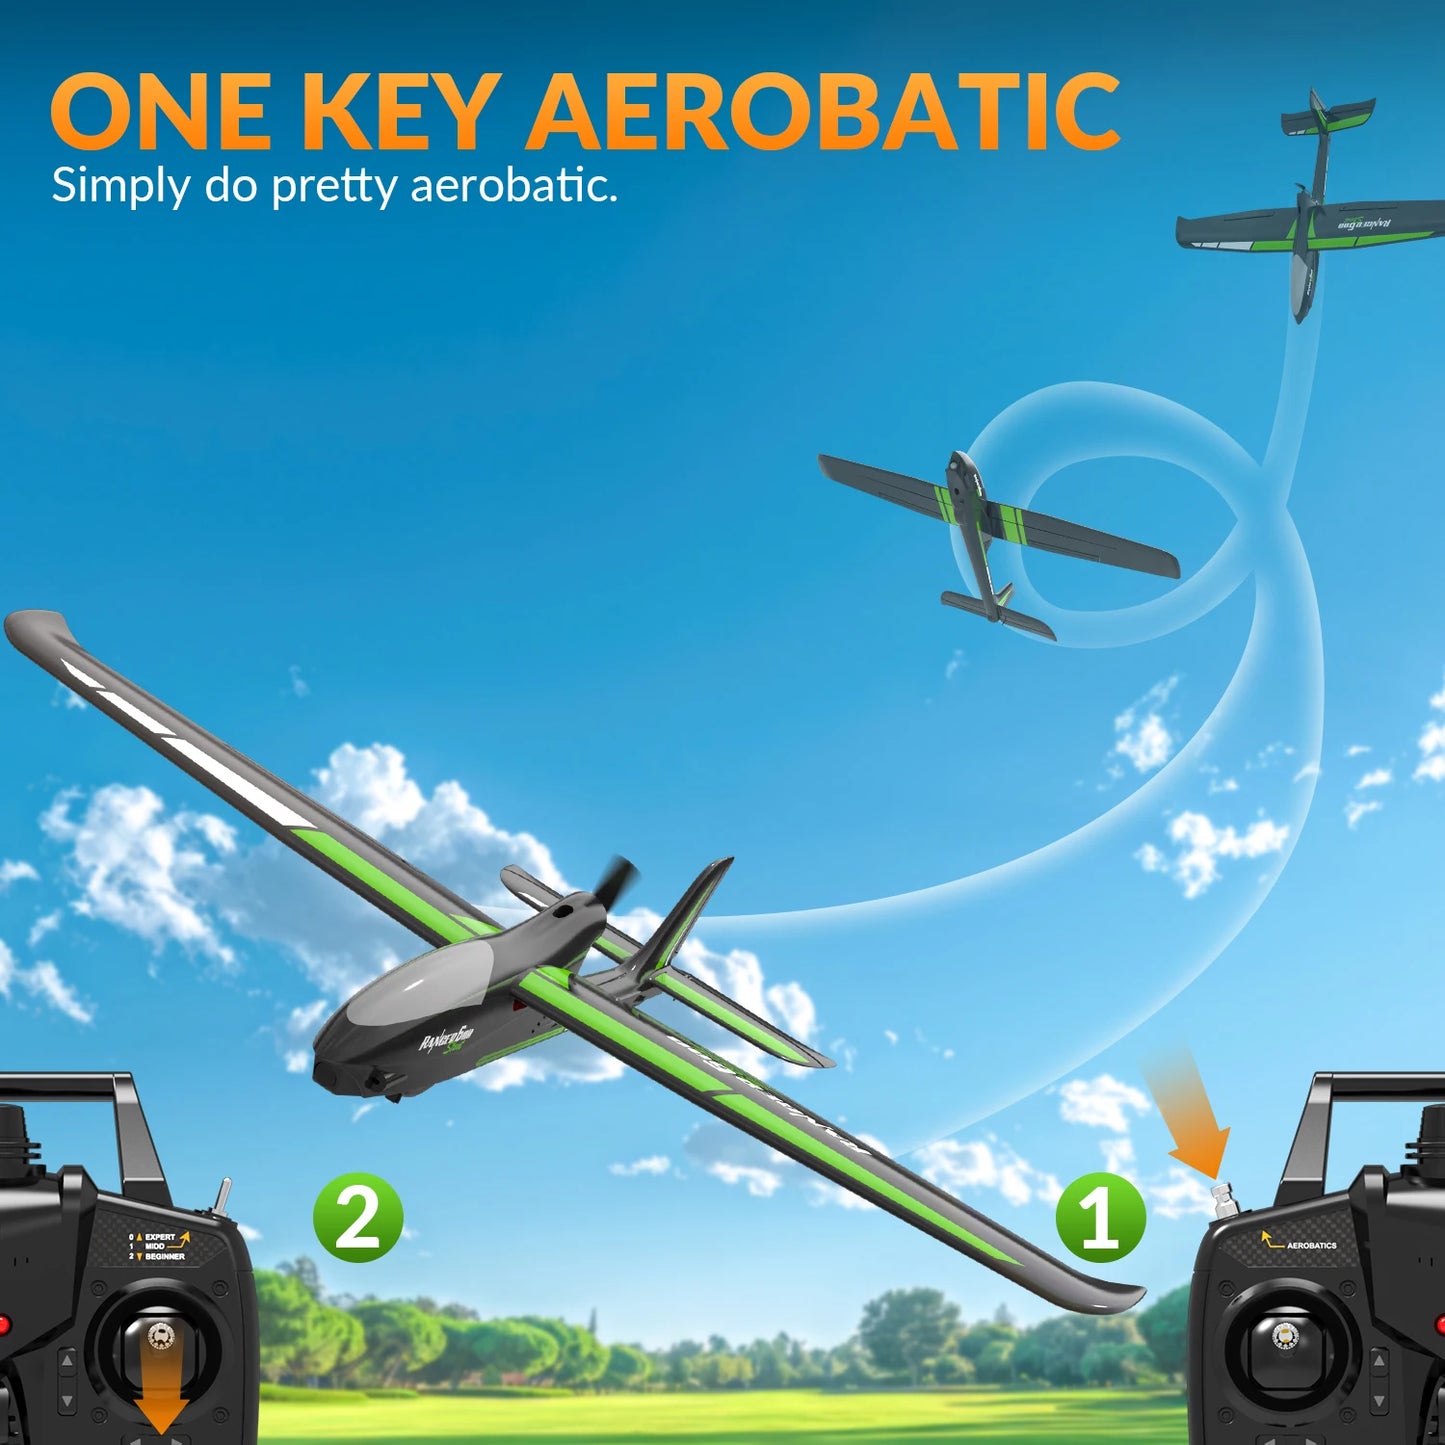 Ultimate Volantex Ranger600 RC Plane - Ready-to-Fly Outdoor Aircraft with Gyro Stabilizer